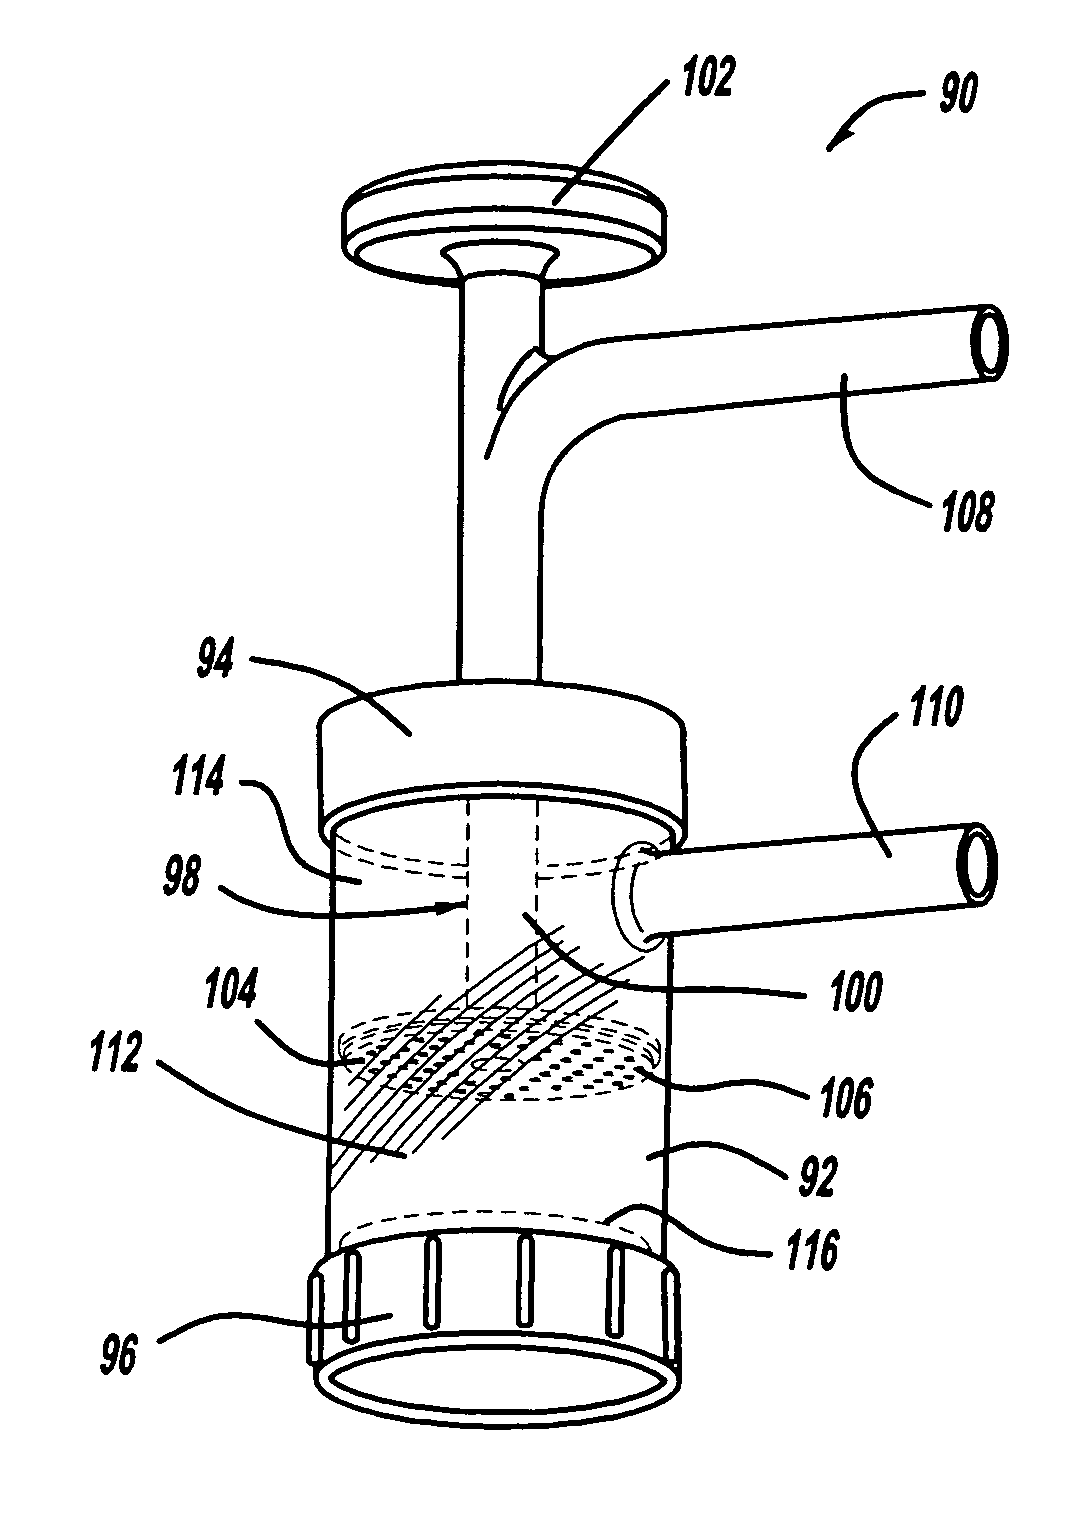 Device for collecting bone material during a surgical procedure